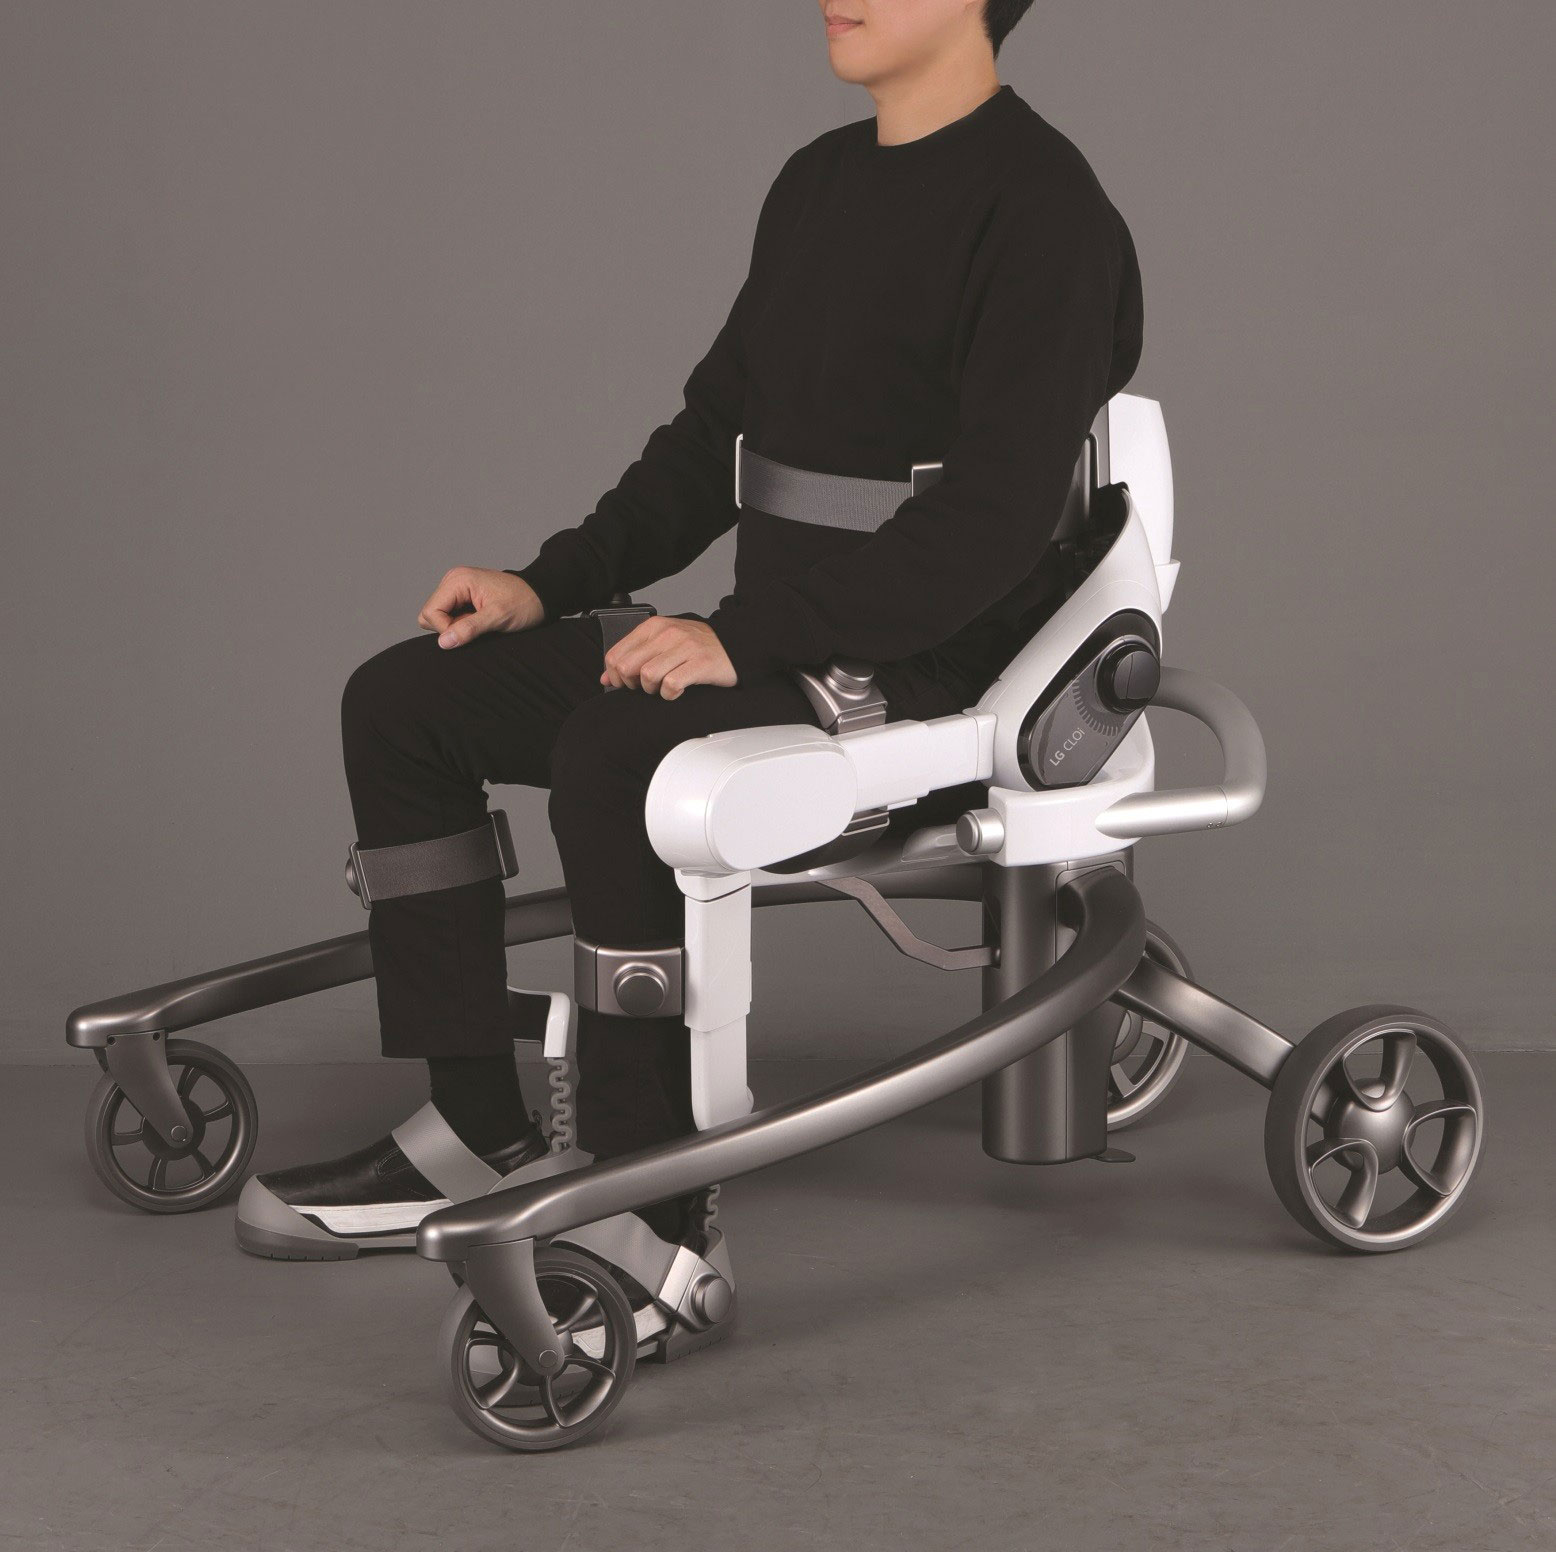 LG CLOi SuitBot Seated